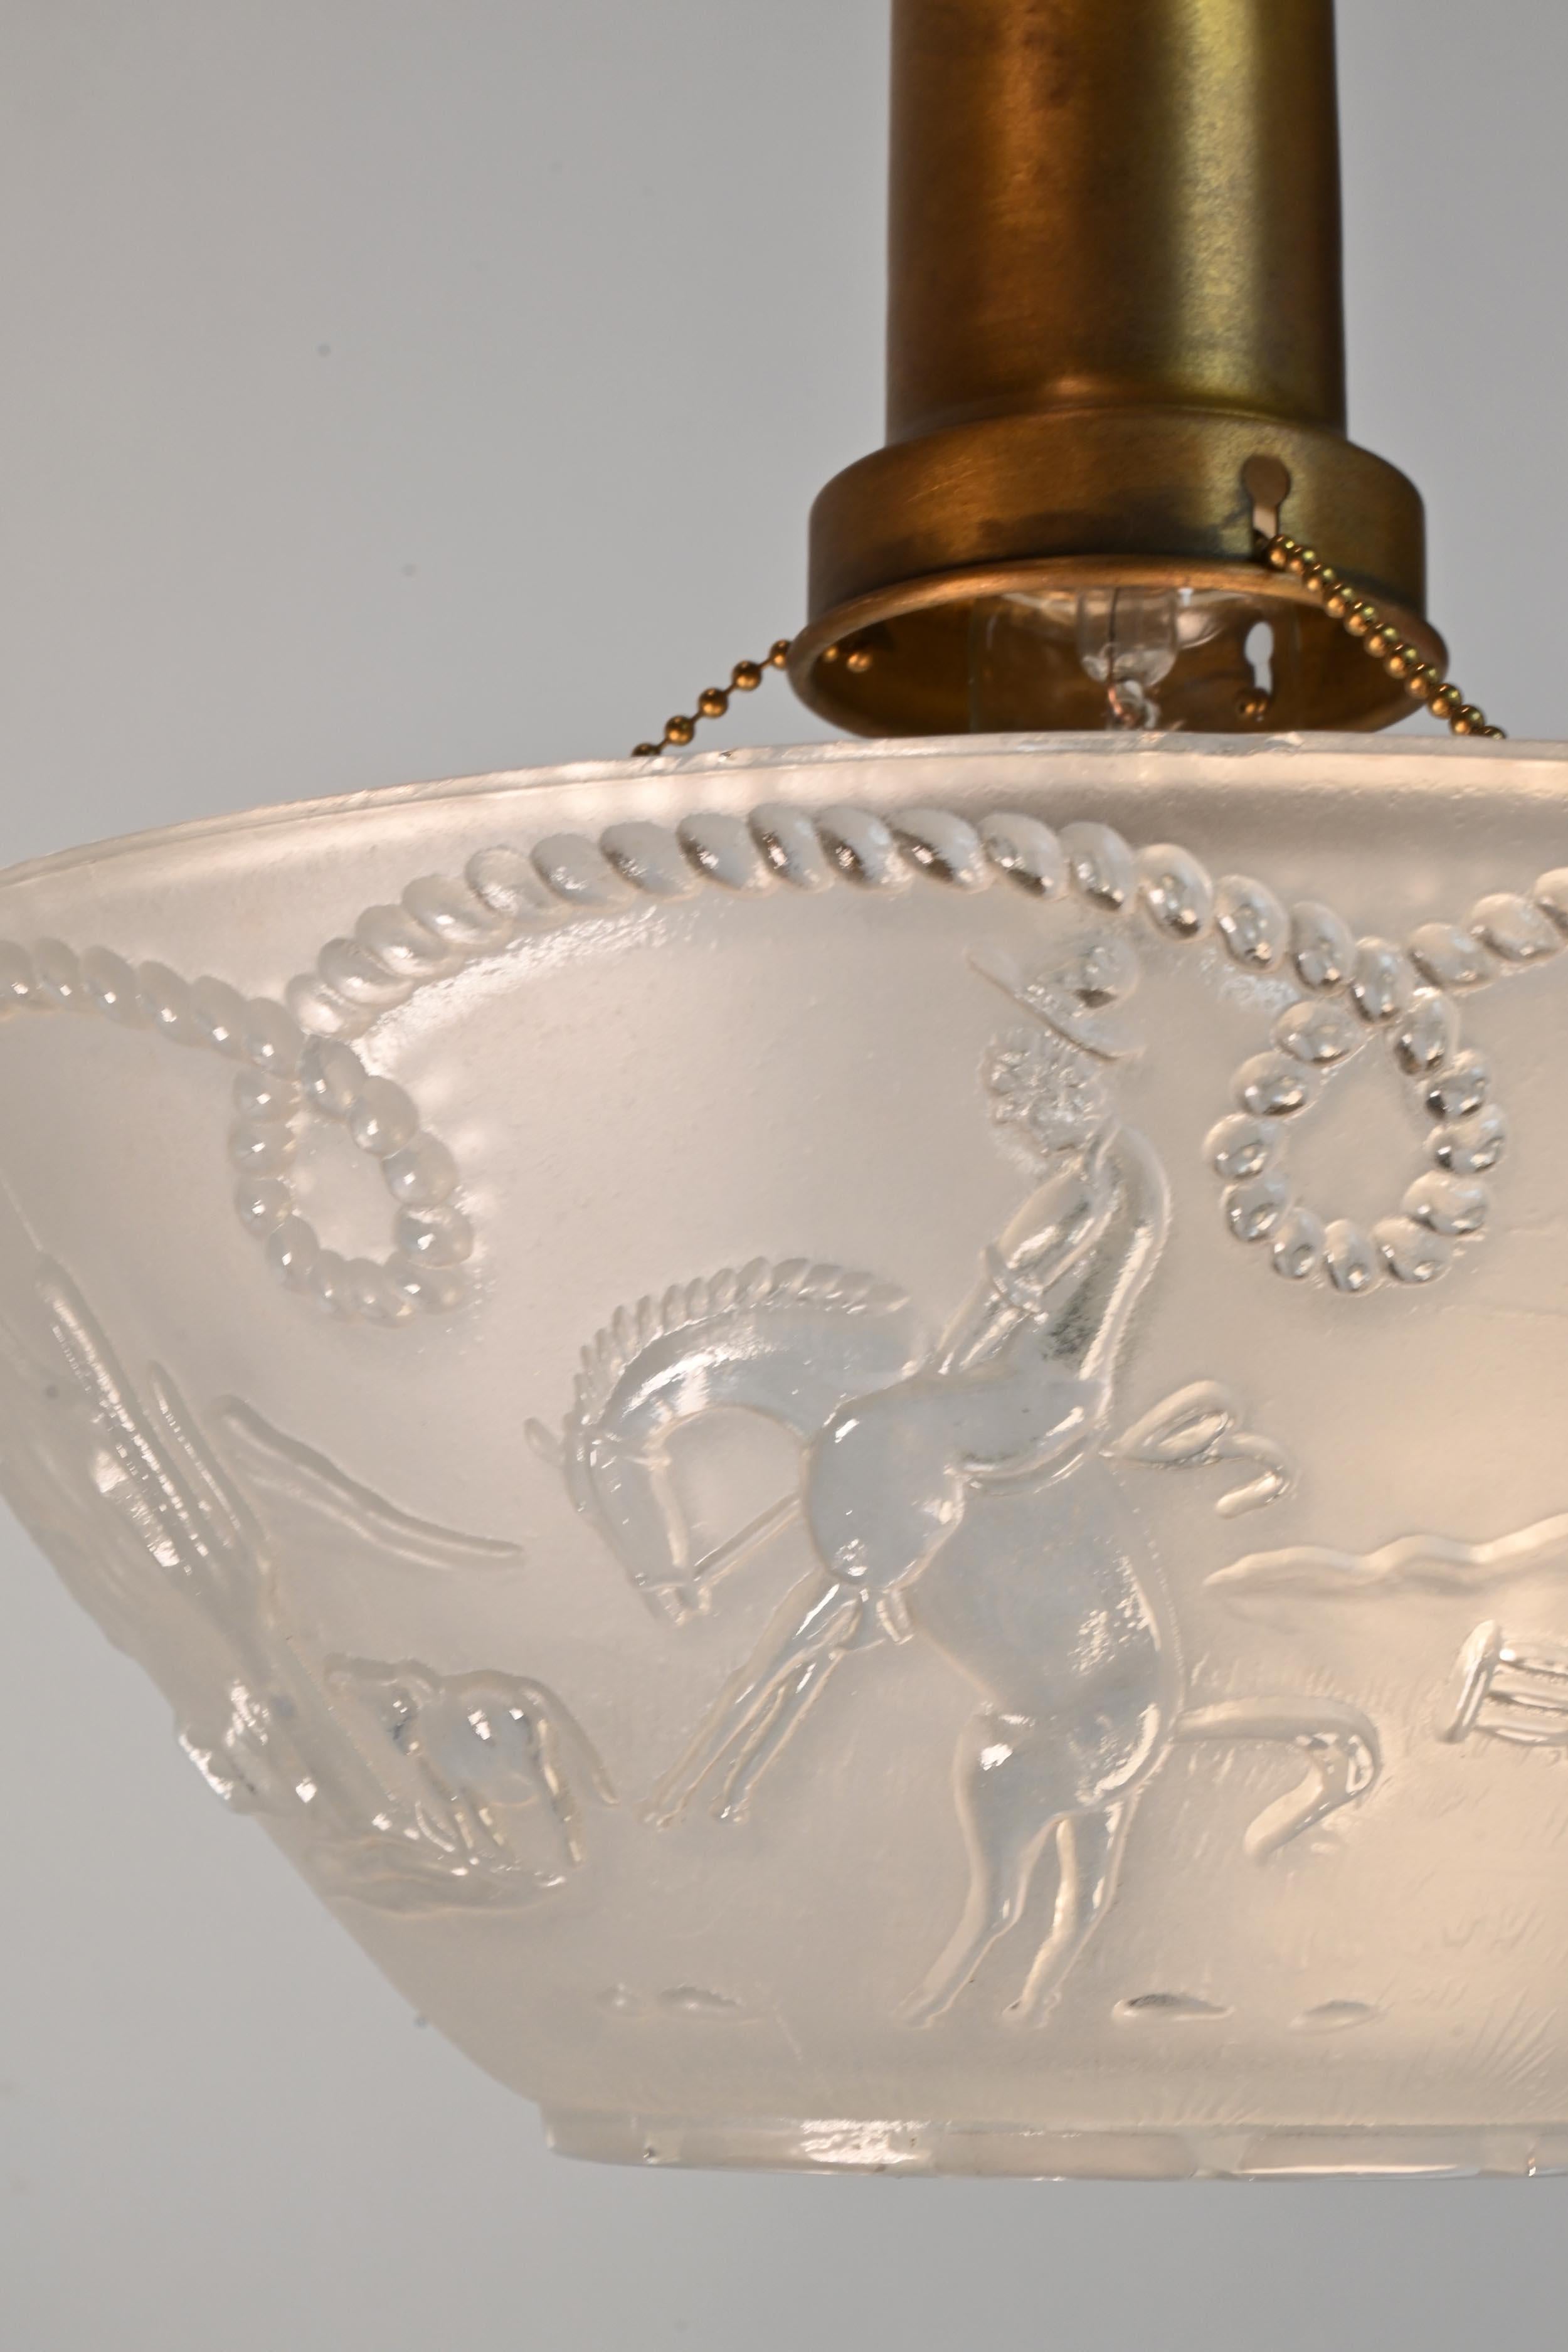 North American Bronco Cowboy Western Themed Molded Glass Flush Mount Fixture